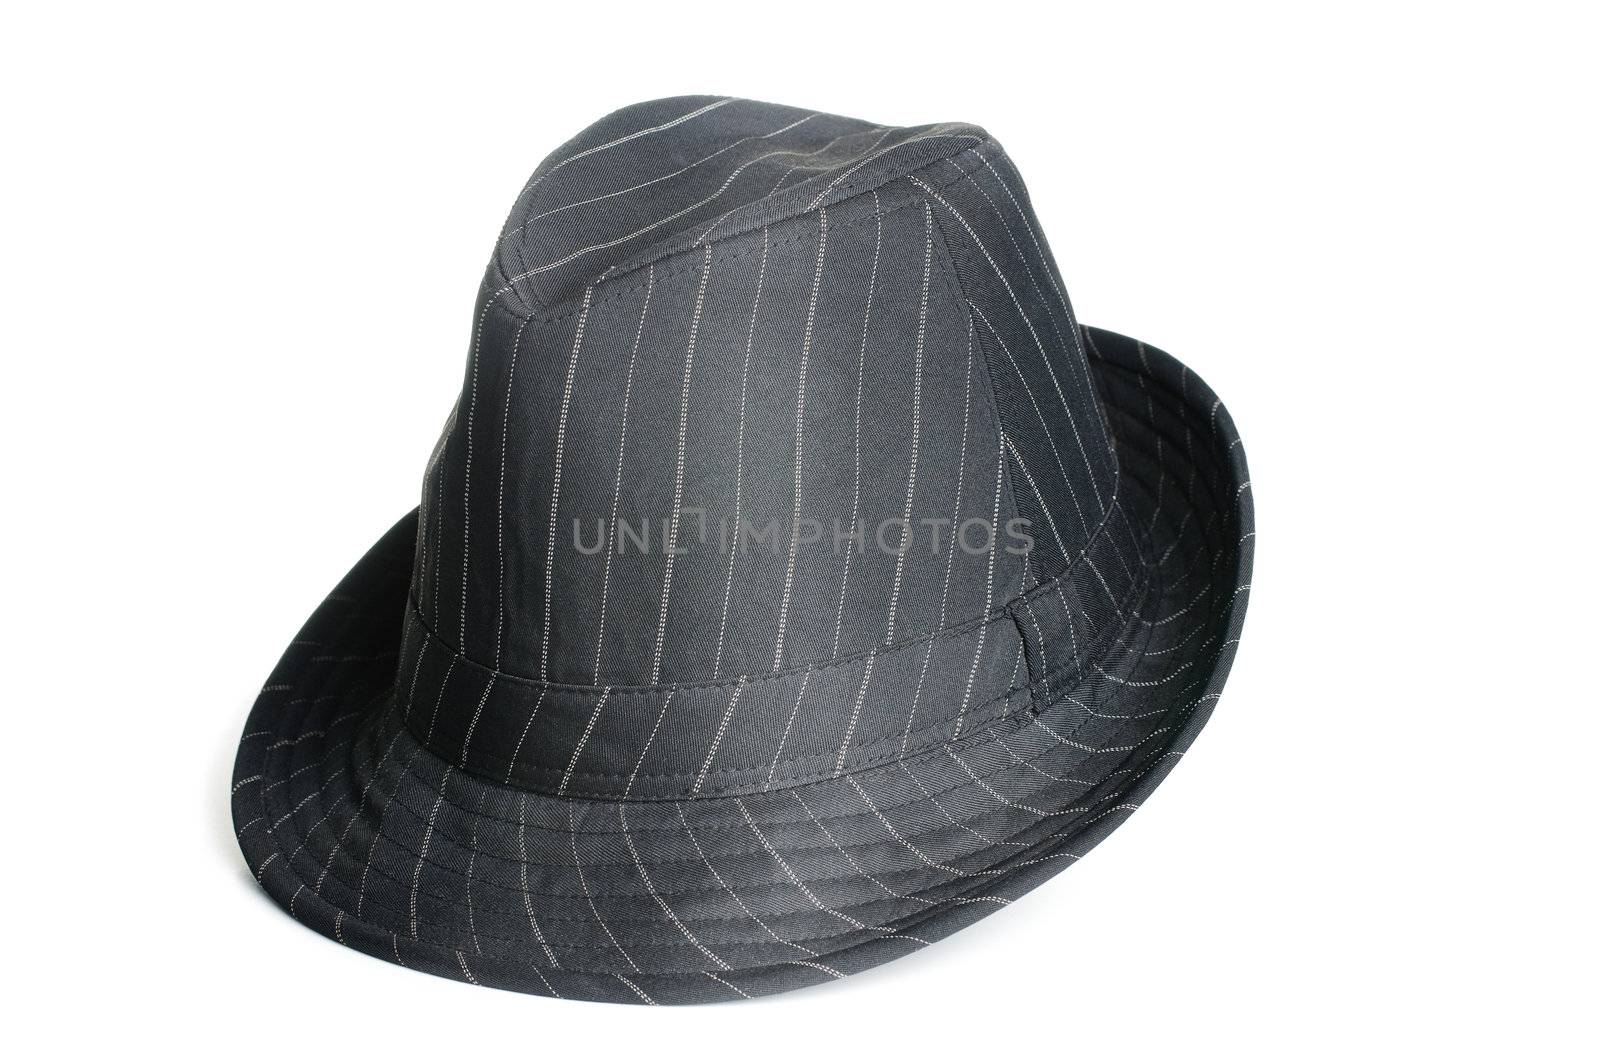 A black striped classic looking fedora men's hat.